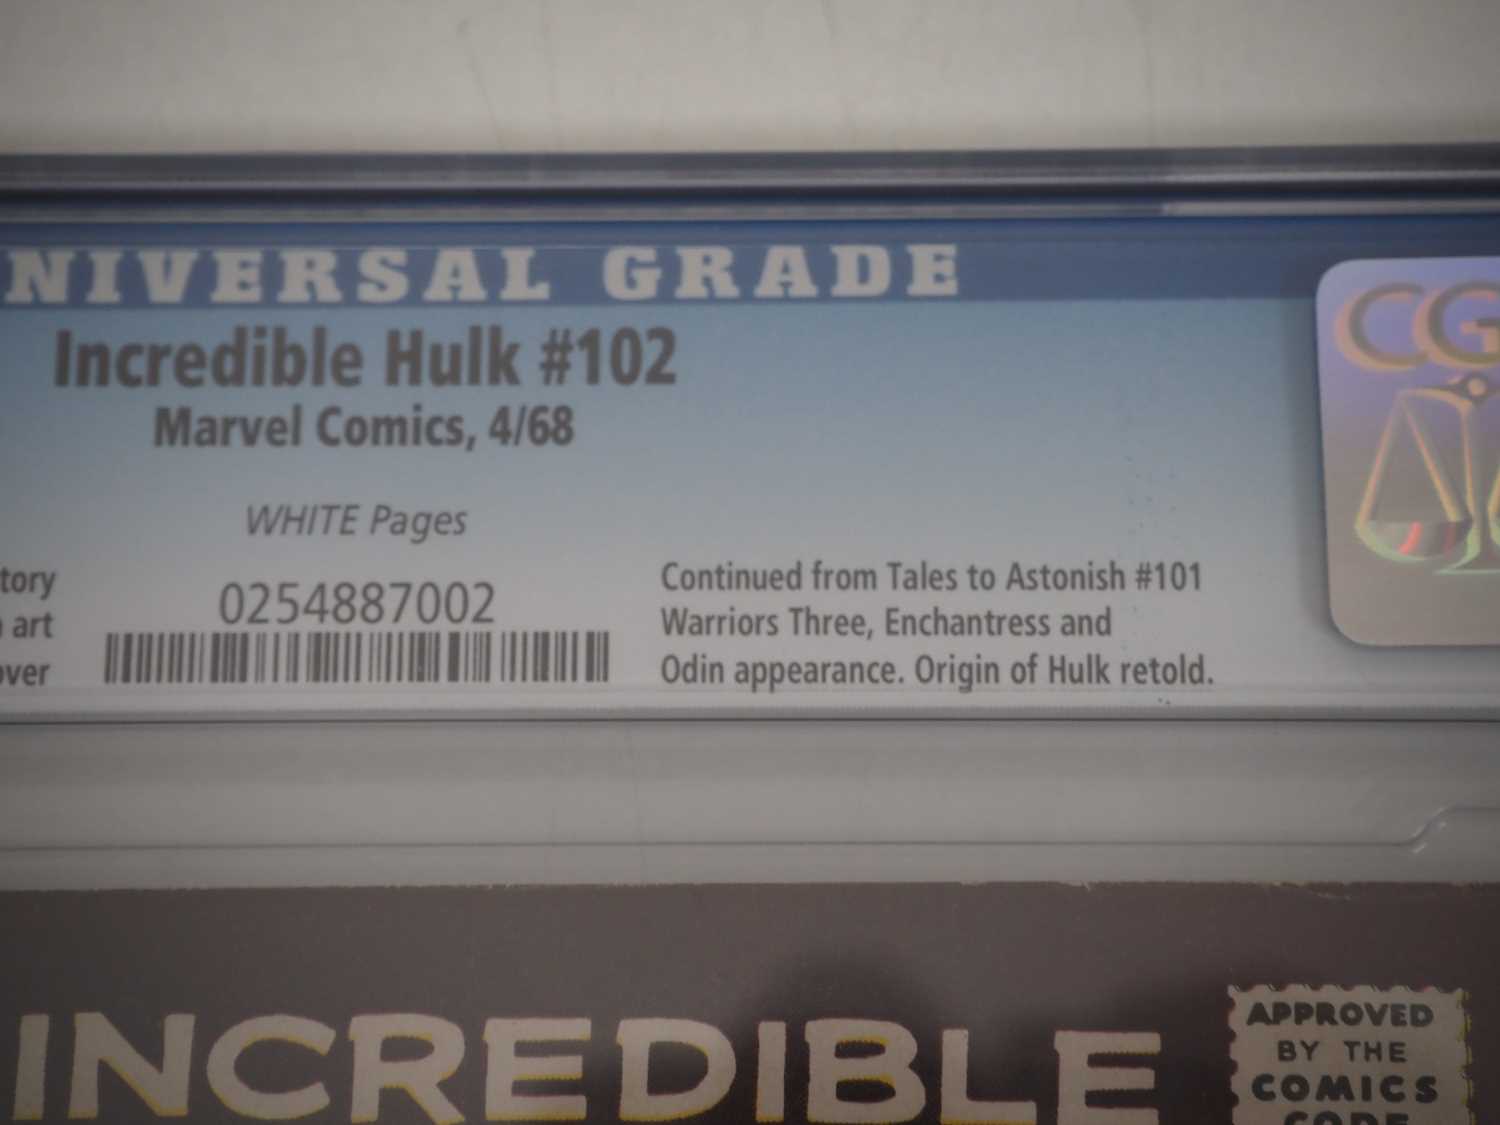 INCREDIBLE HULK #102 (1968 - MARVEL) - GRADED 8.5 (VF+) by CGC - First issue of the (new) solo title - Image 4 of 4